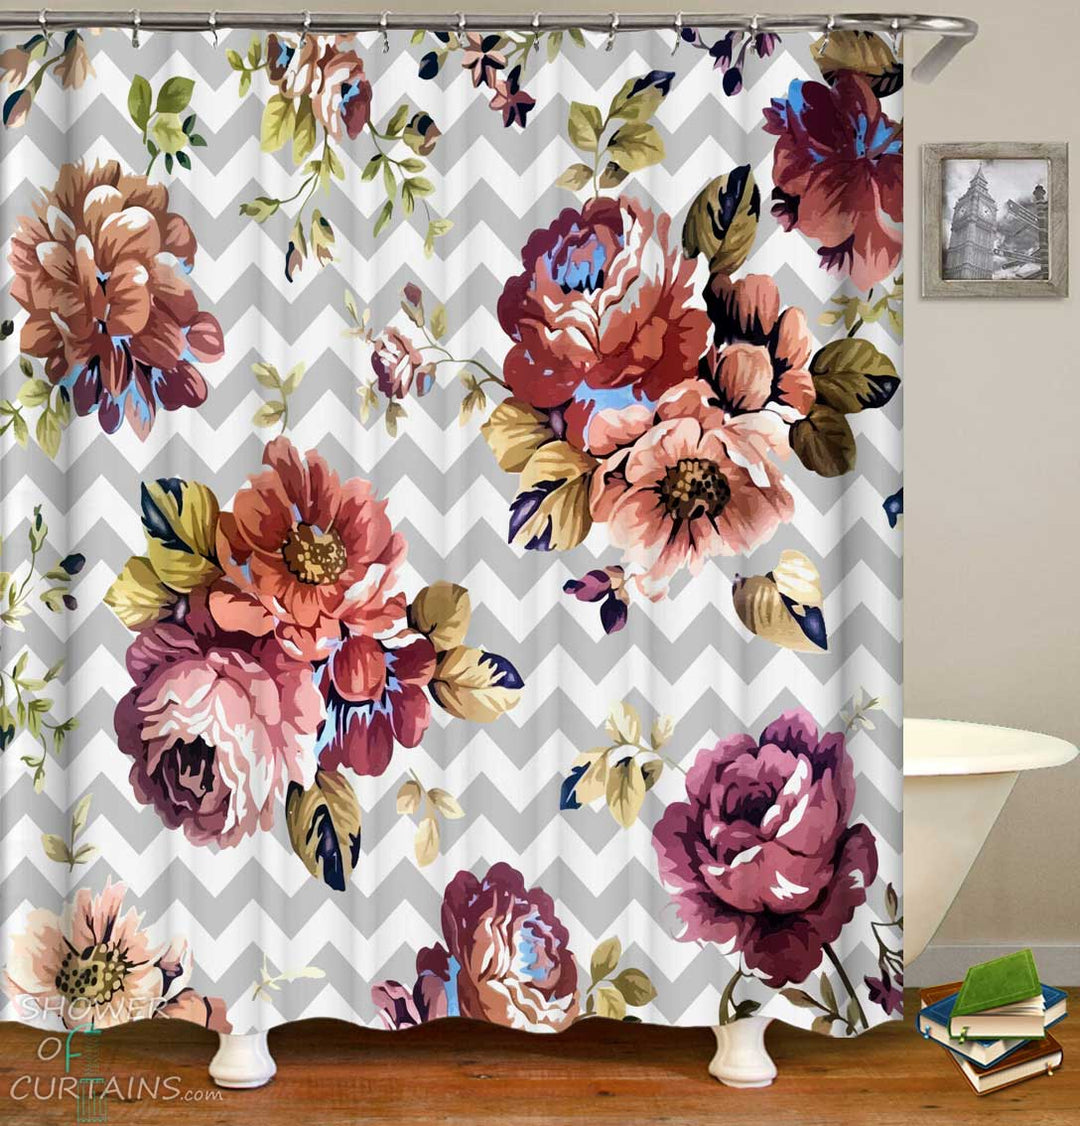 Shower Curtains with Old Style Roses over Chevron